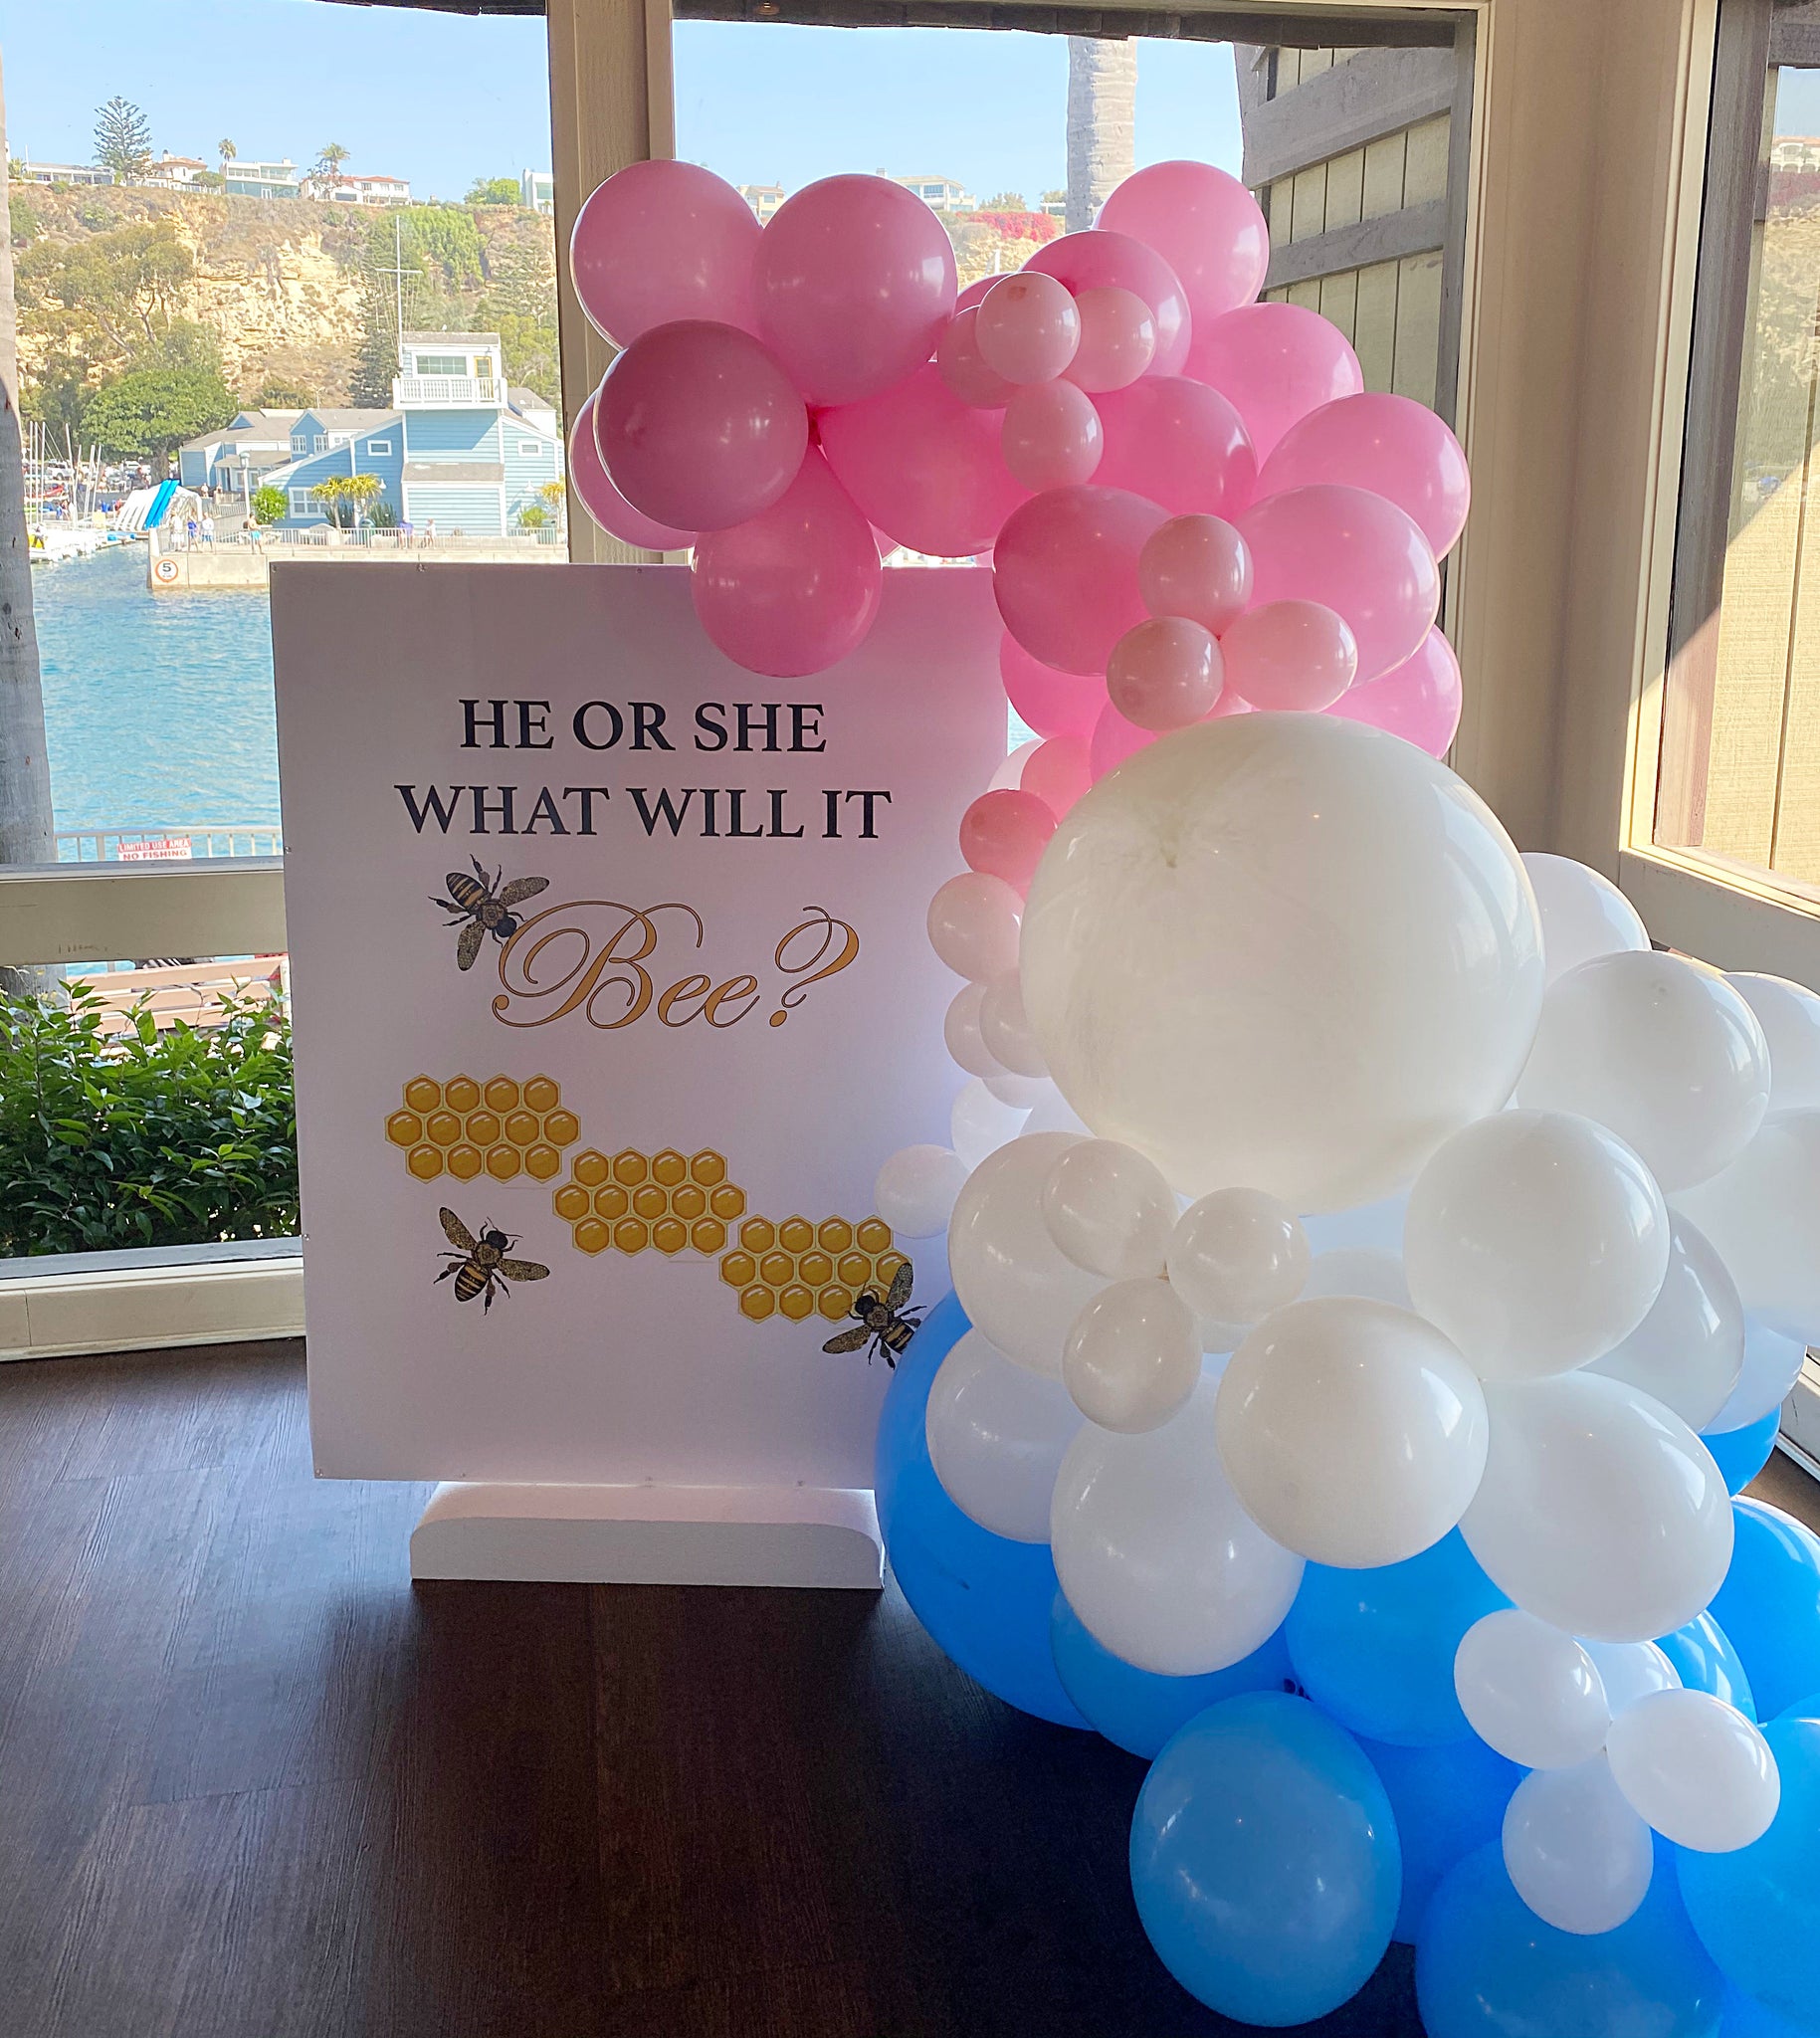 North Shore Balloon Decor - Quality Service & Stunning Results